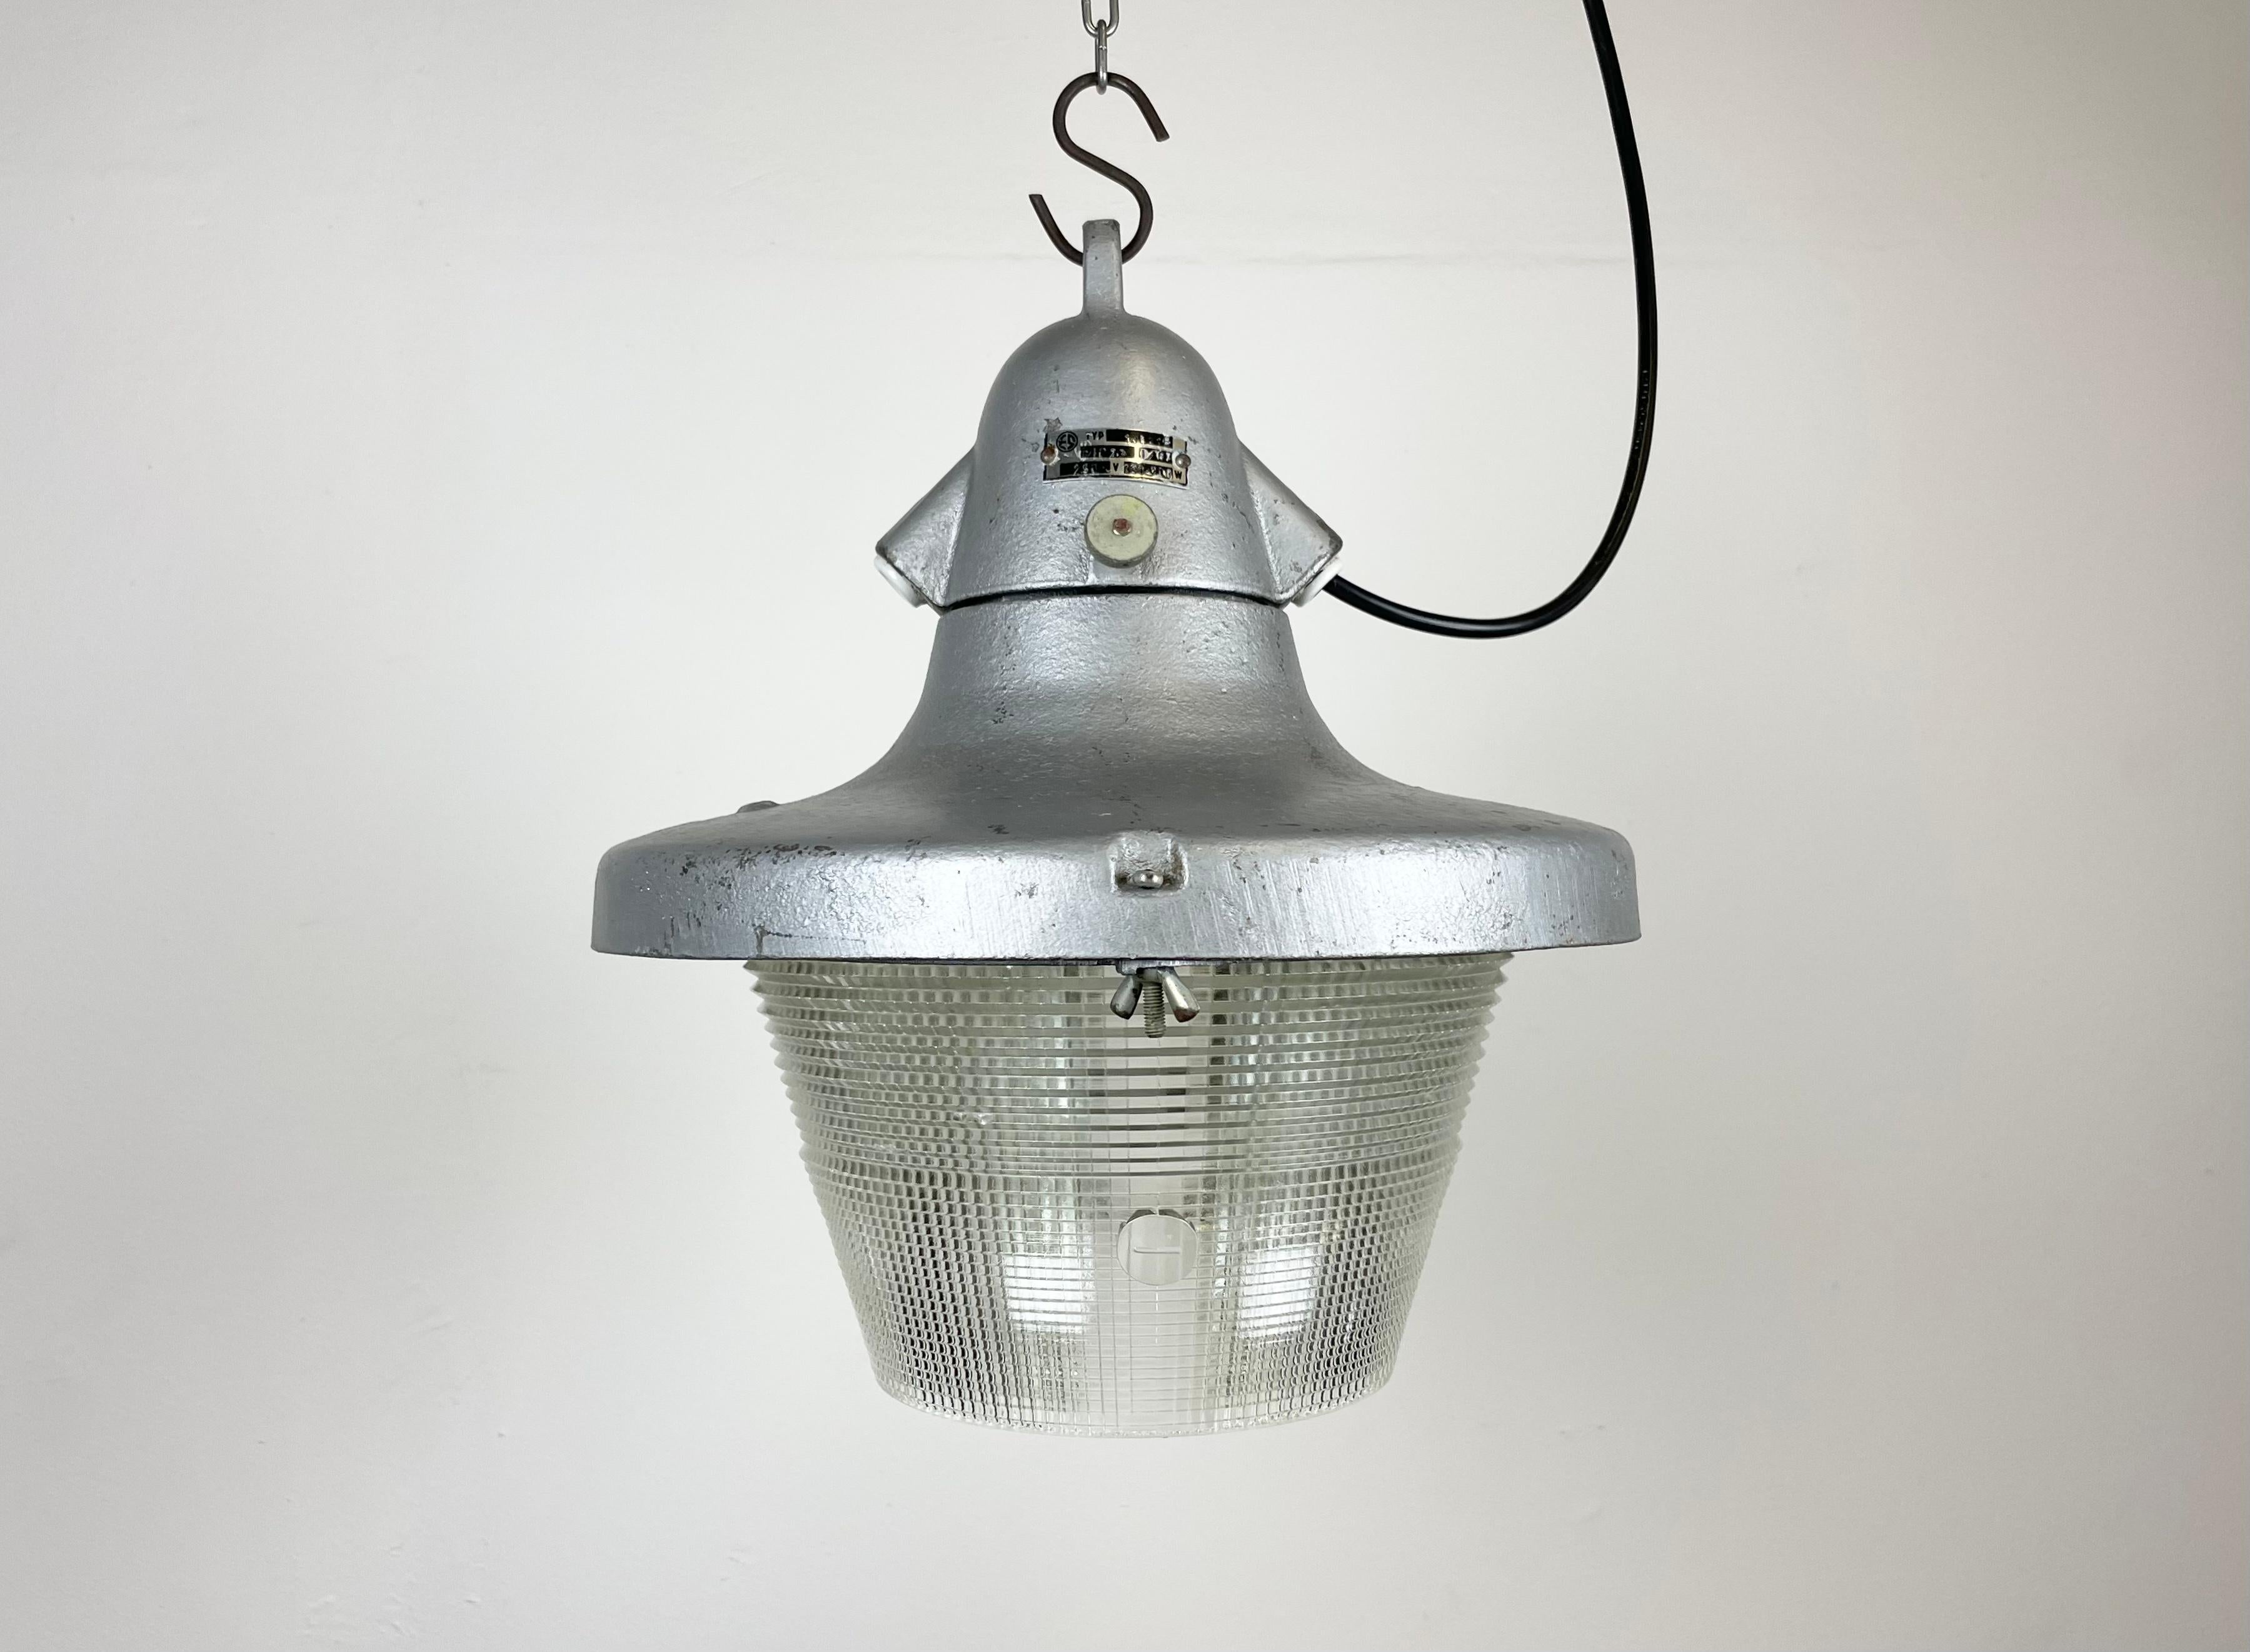 Industrial light made by Elektrosvit in former Czechoslovakia during the 1950s. It features a cast aluminium body and a striped glass cover.
The porcelain socket requires standard E27/ E26 lightbulbs. New wire. The weight of the lamp 4,2 kg. The